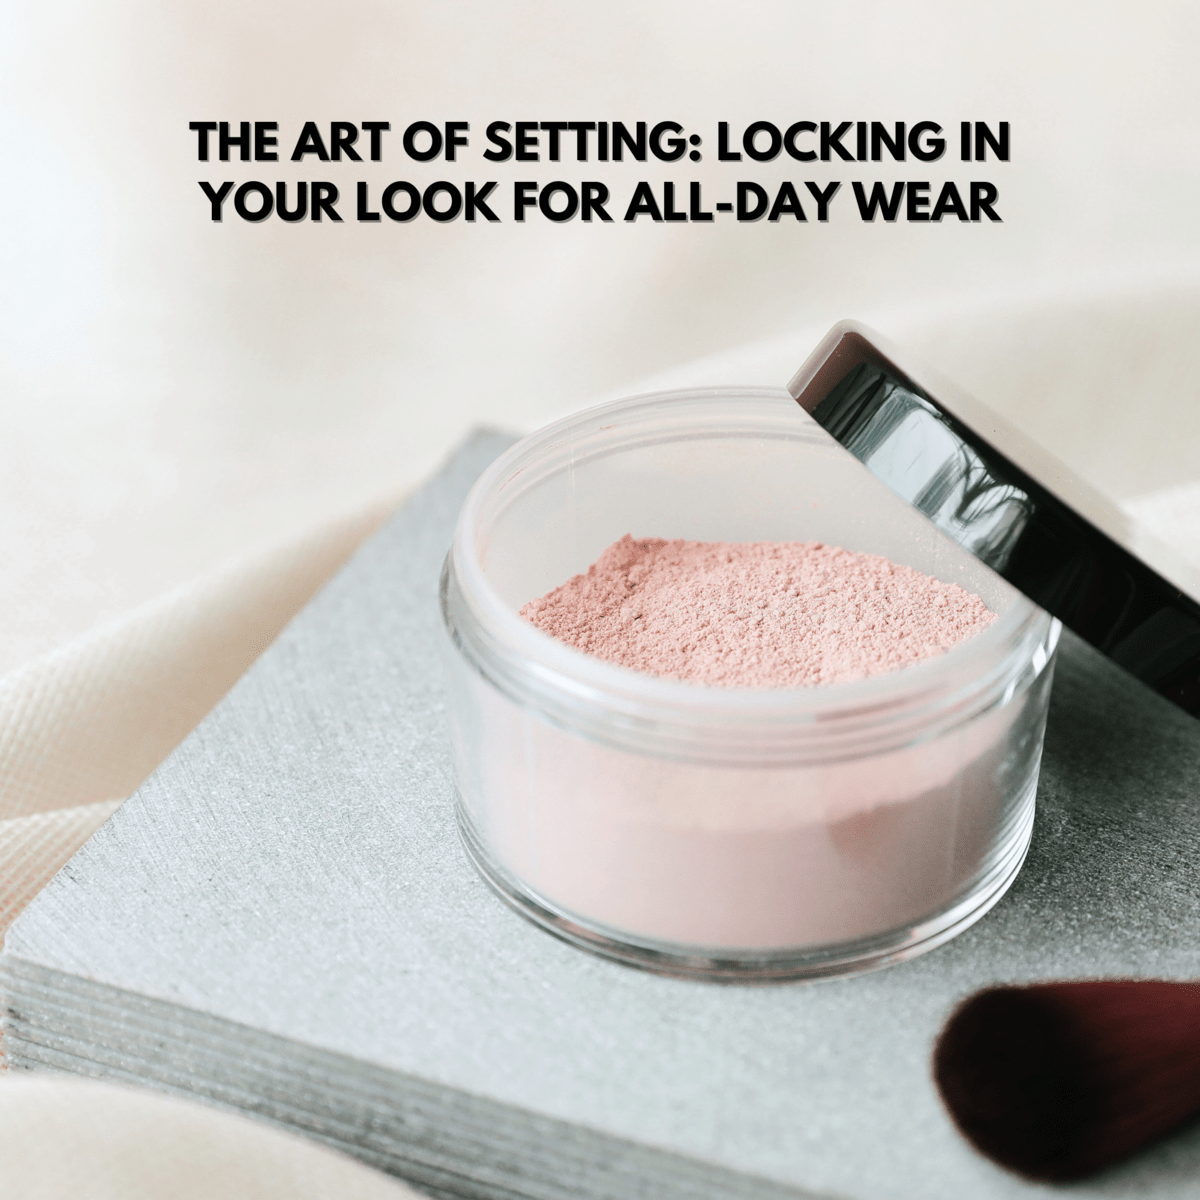 The Art of Setting: Locking in Your Look for All-Day Wear